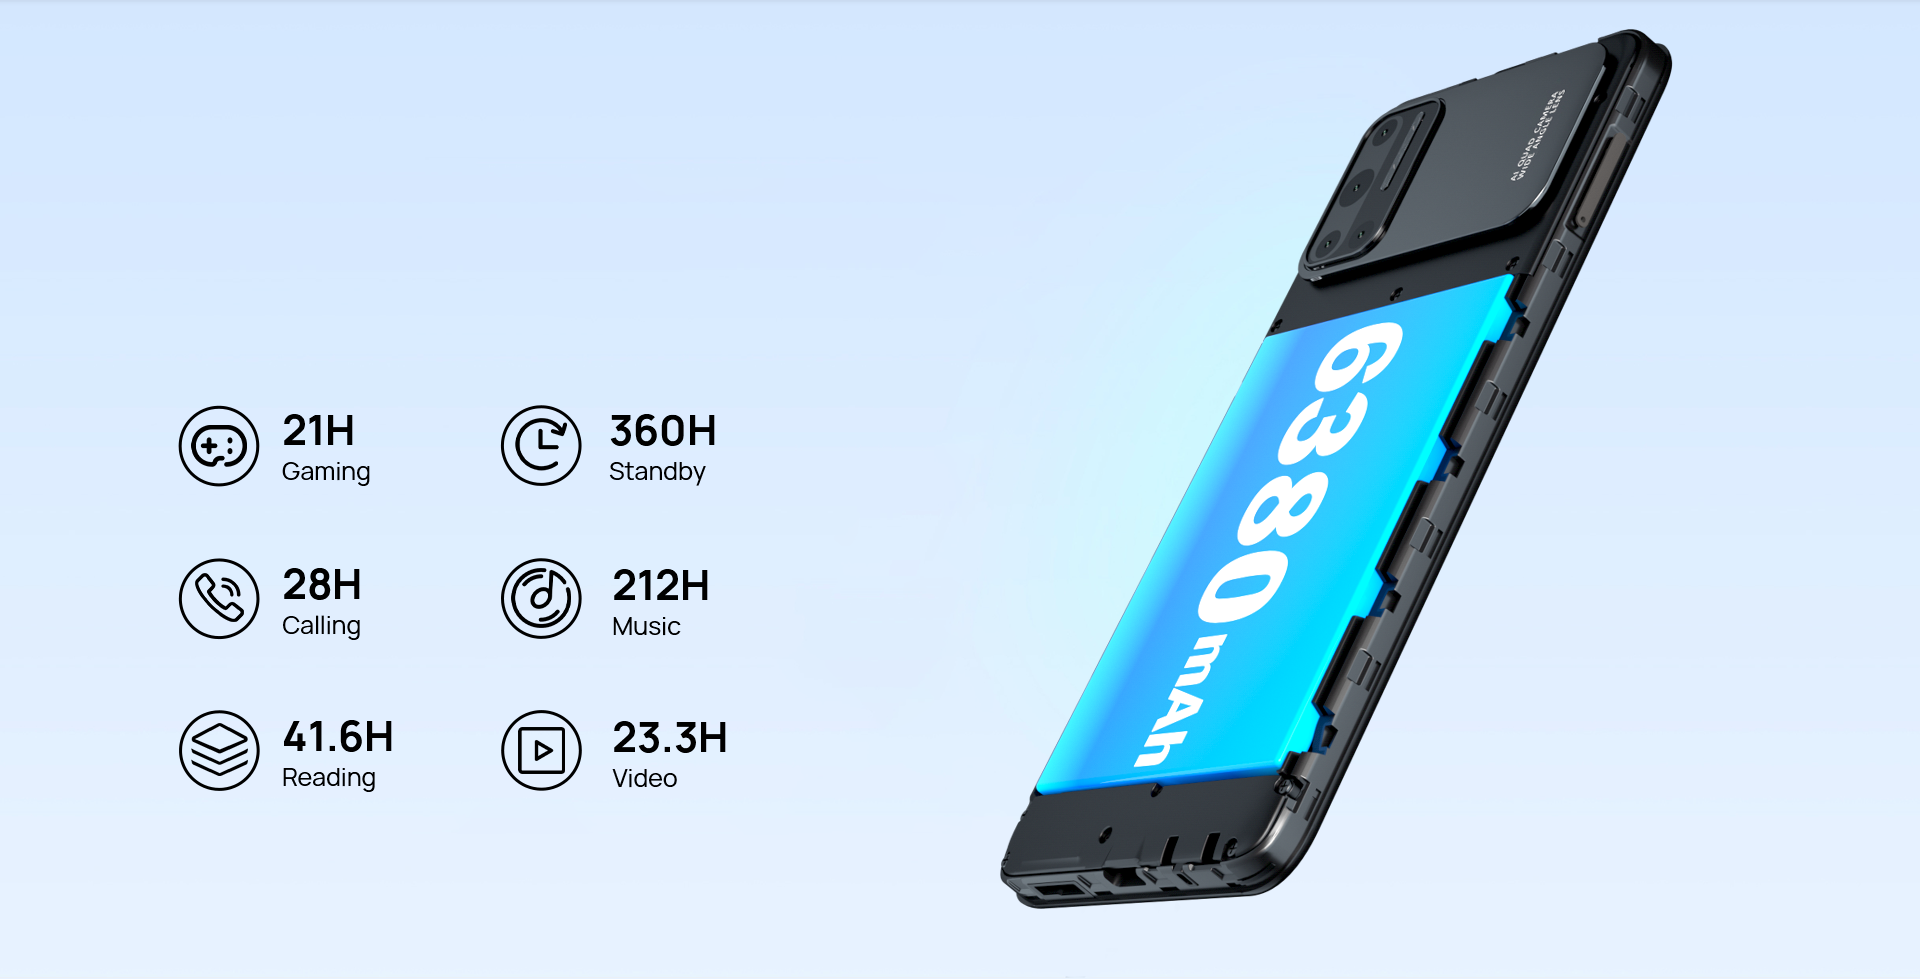 6380mAh battery is enough for 21hrs of gaming, 28 hours calling, etc